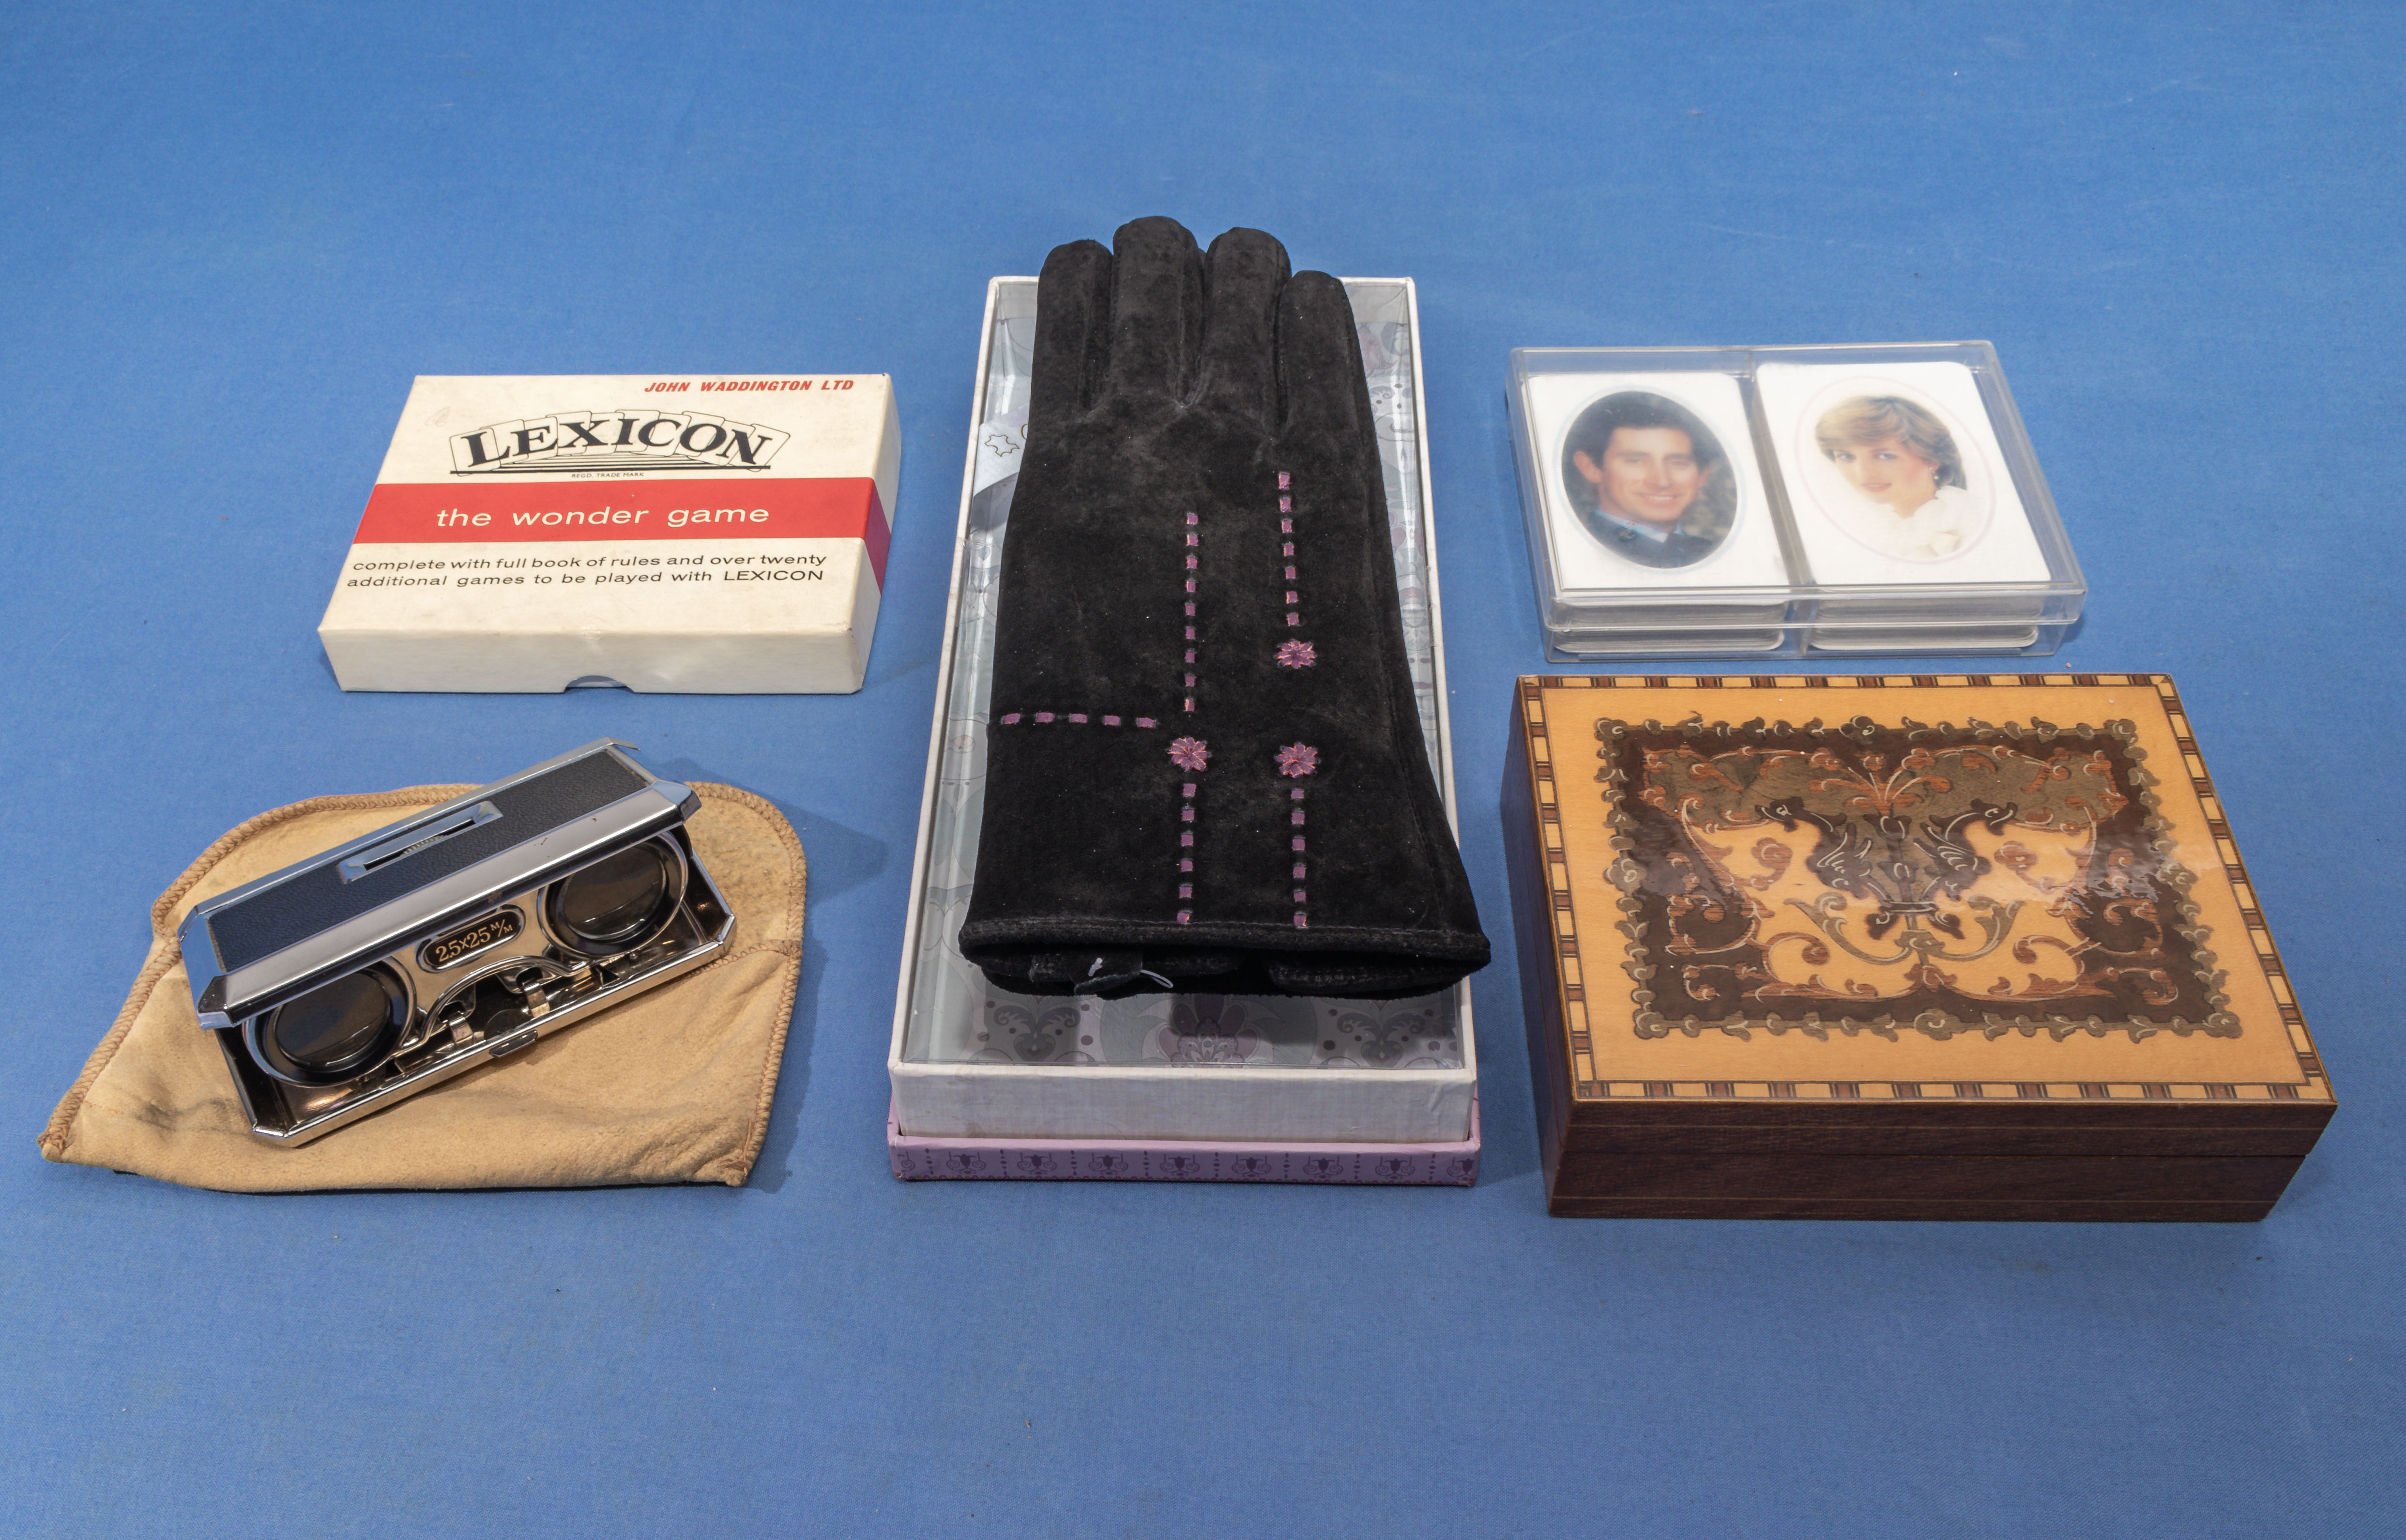 Pair of lady’s glove, opera glasses, two packs of cards and a box with bank notes